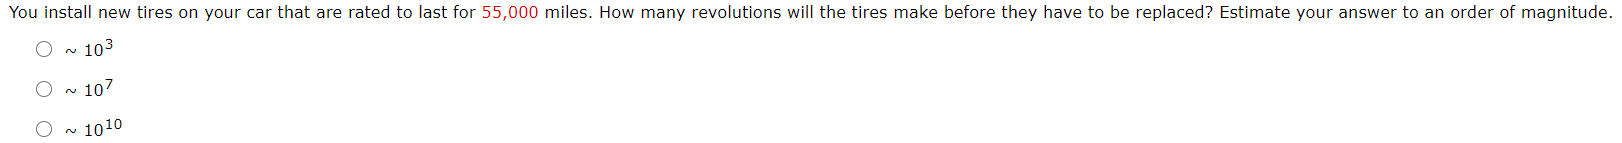 You install new tires on your car that are rated to last for 55,000 miles. How many revolutions will the tires make before they have to be replaced? Estimate your answer to an order of magnitude.
- 103
O ~ 107
1010
